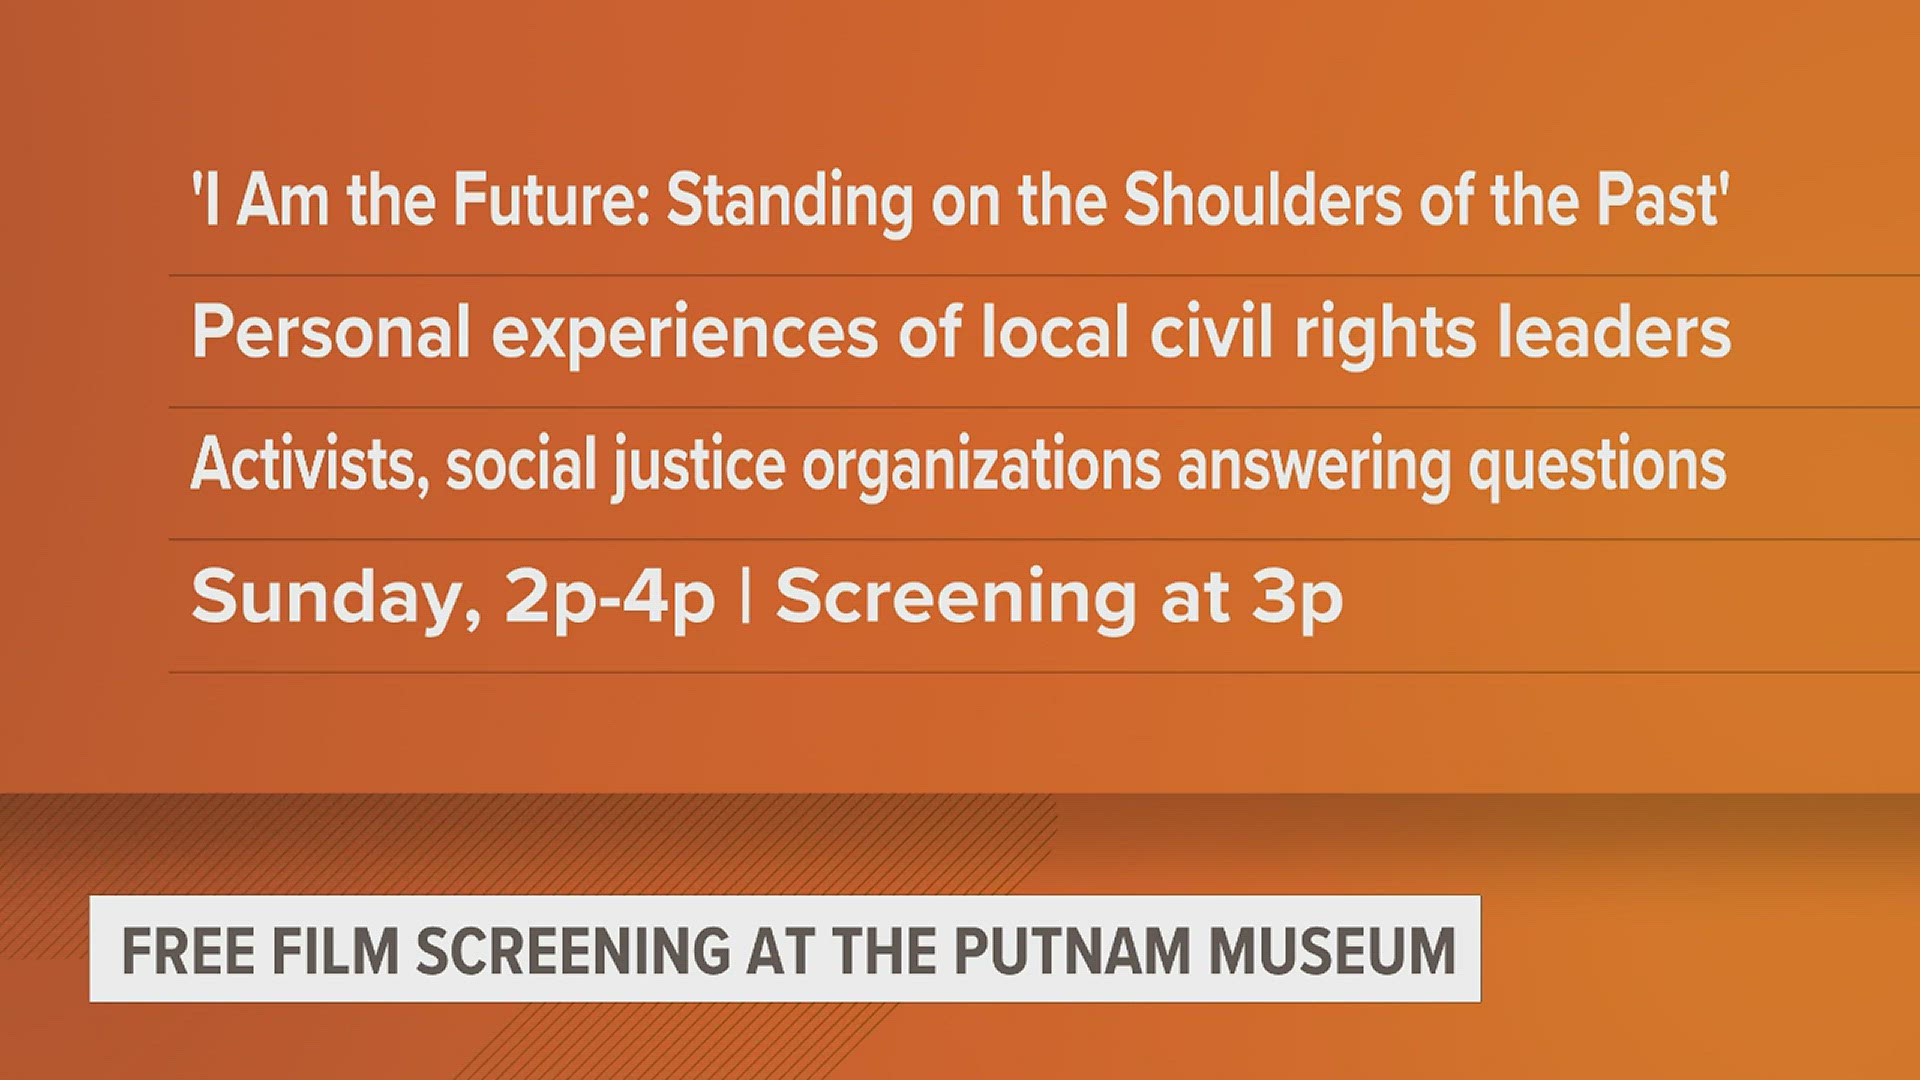 'I Am the Future: Standing on the Shoulders of the Past' film includes personal experiences of Quad City residents who fought for civil rights in the early 1960s.